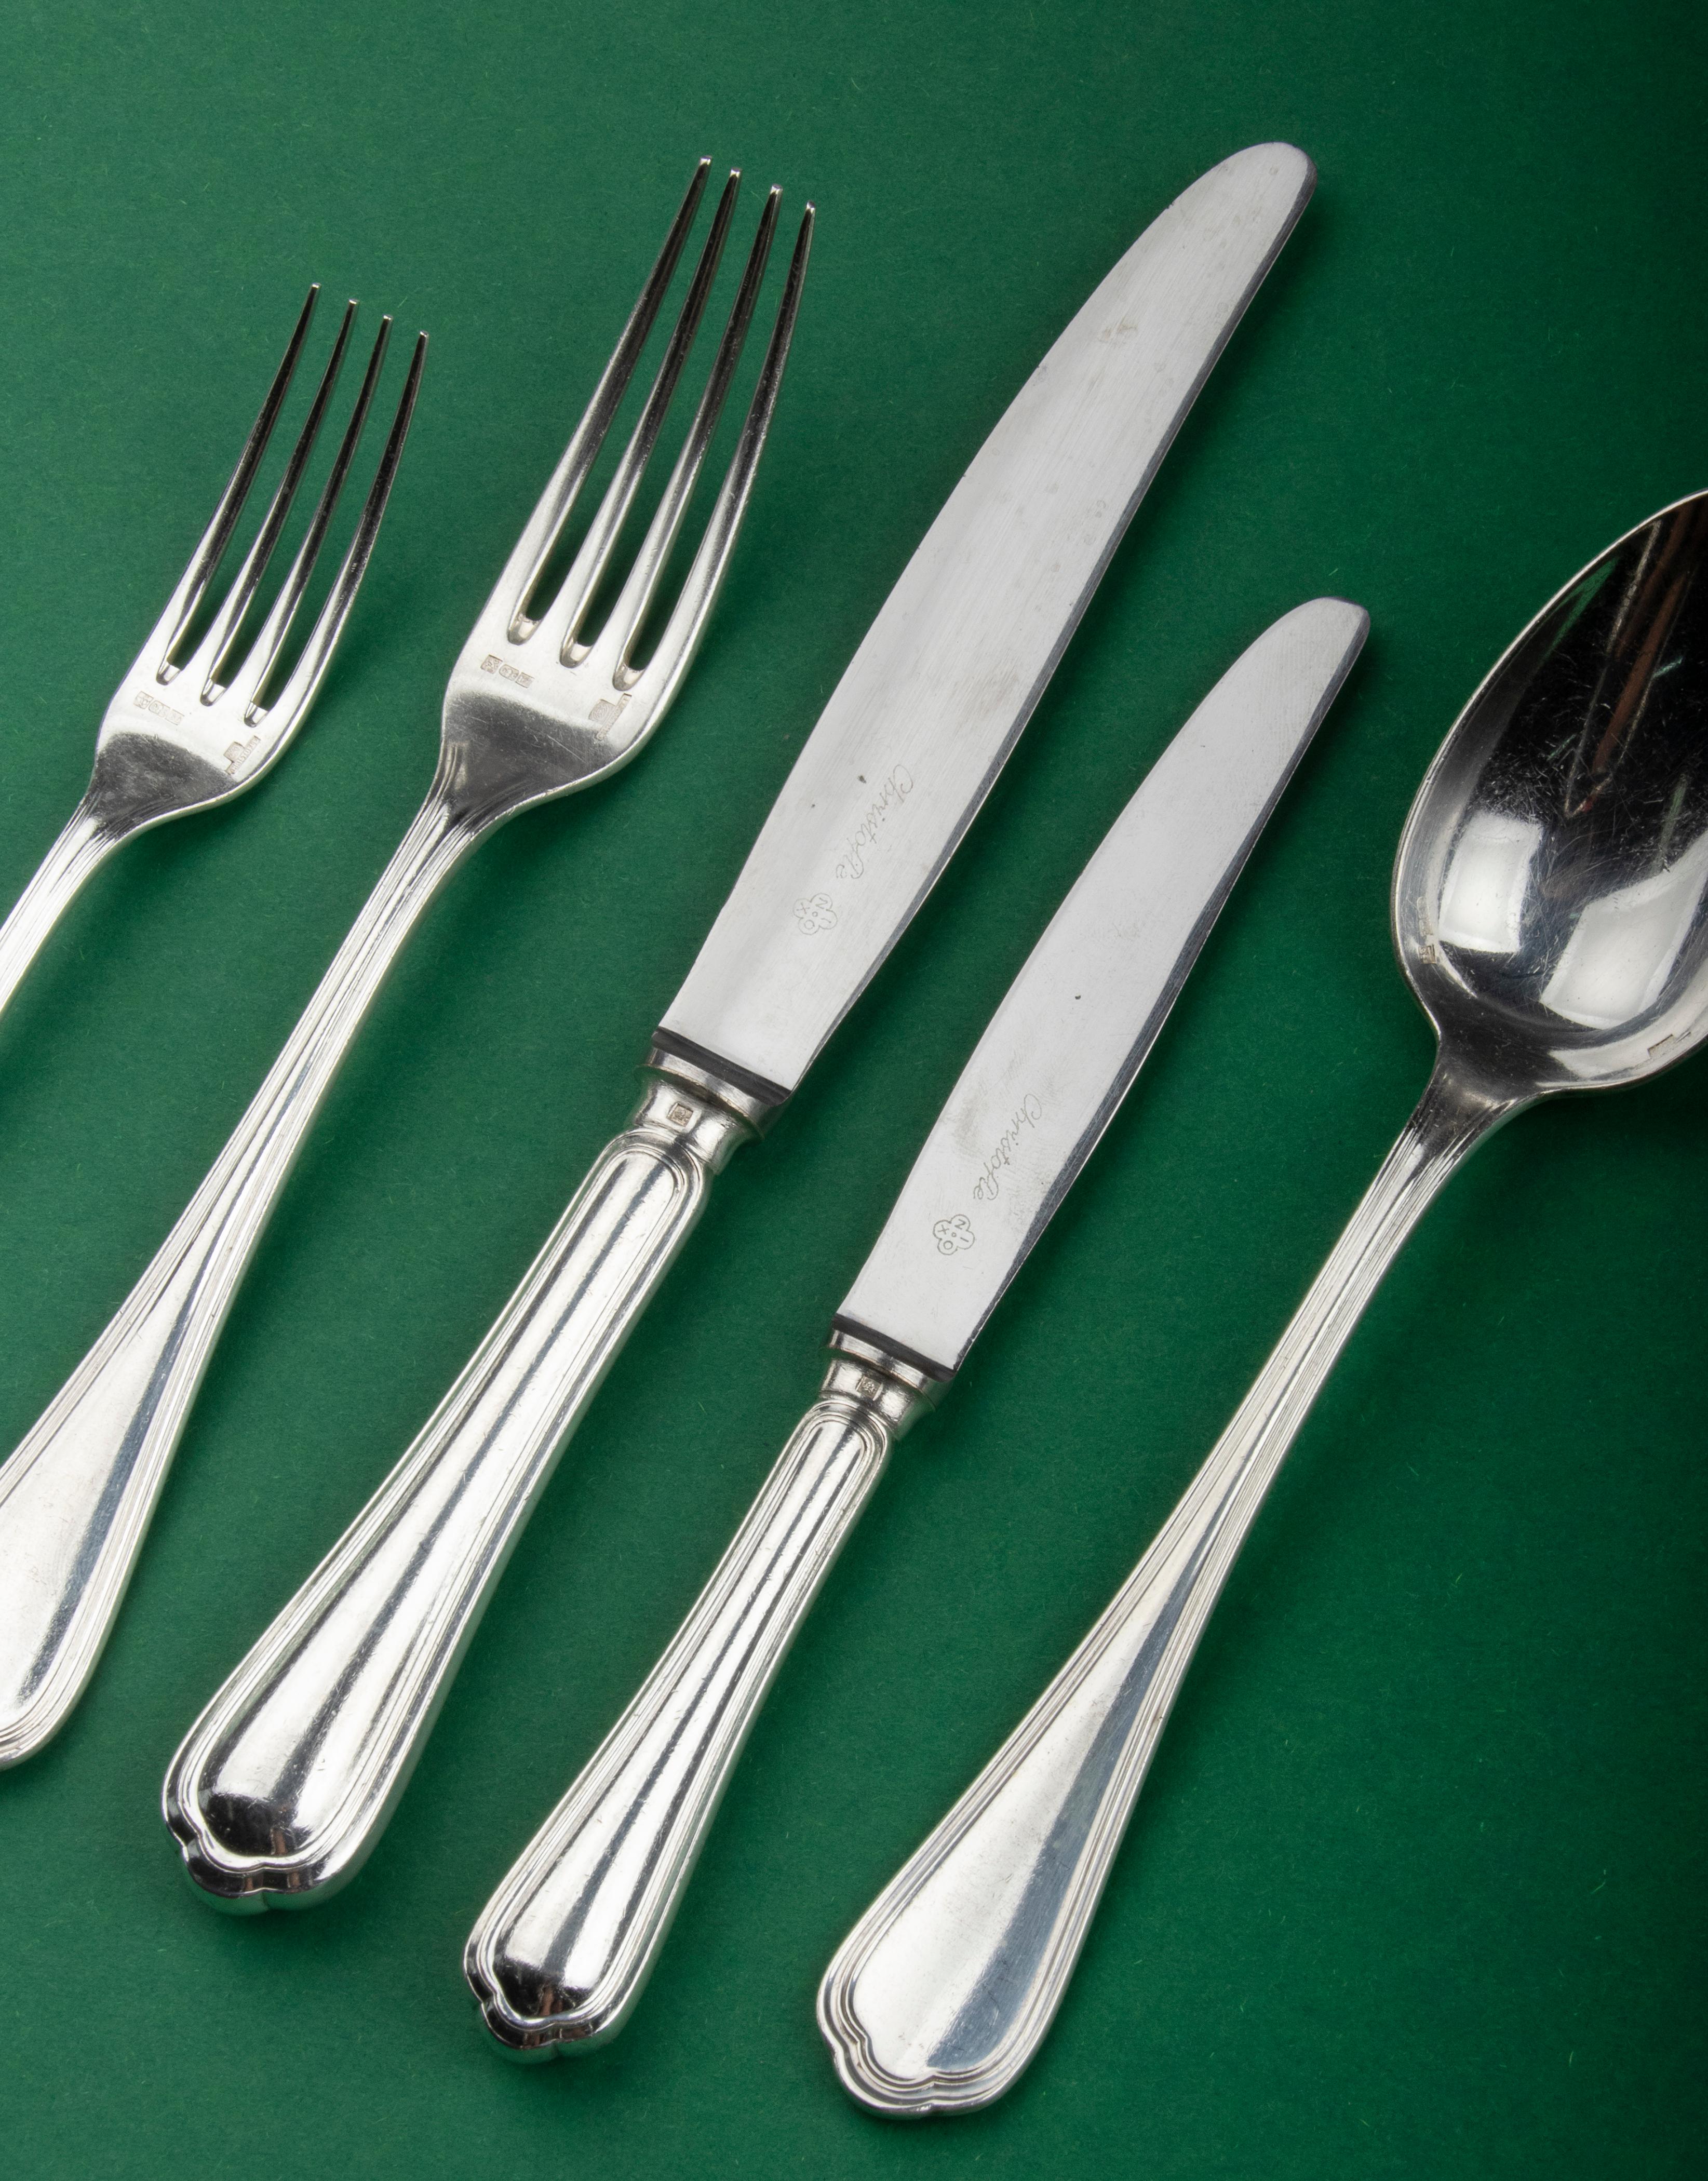 Hand-Crafted 30-Piece Set of Silver Plated Flatware Made by Christofle Model Spatours